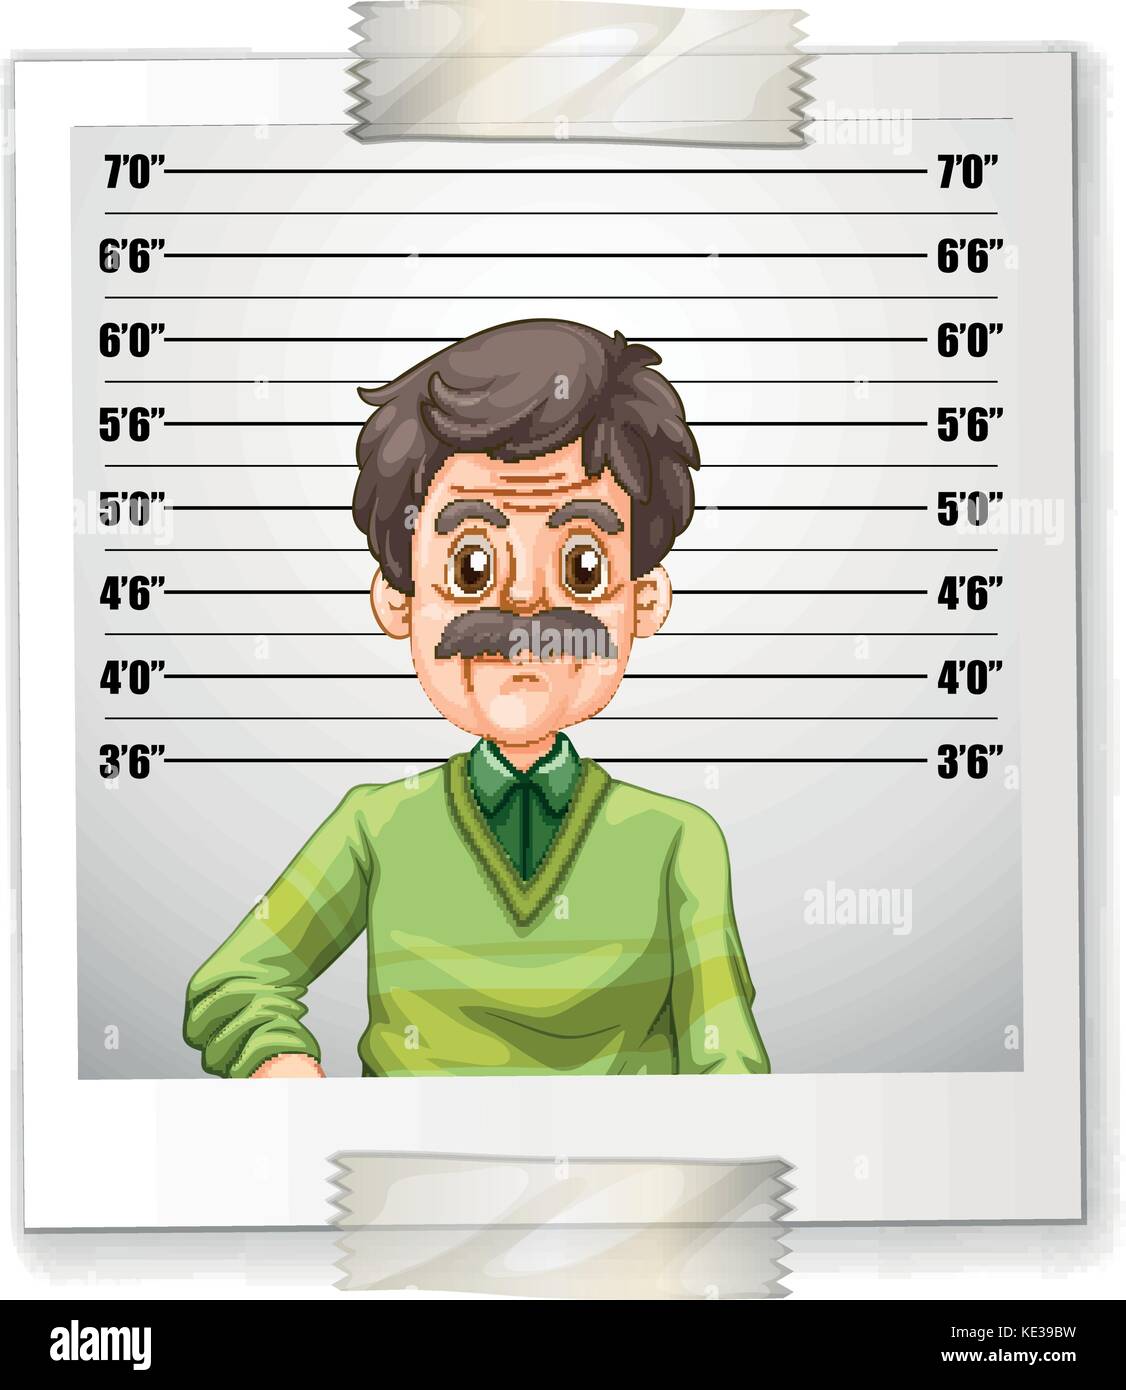 Man photo with height measurement illustration Stock Vector